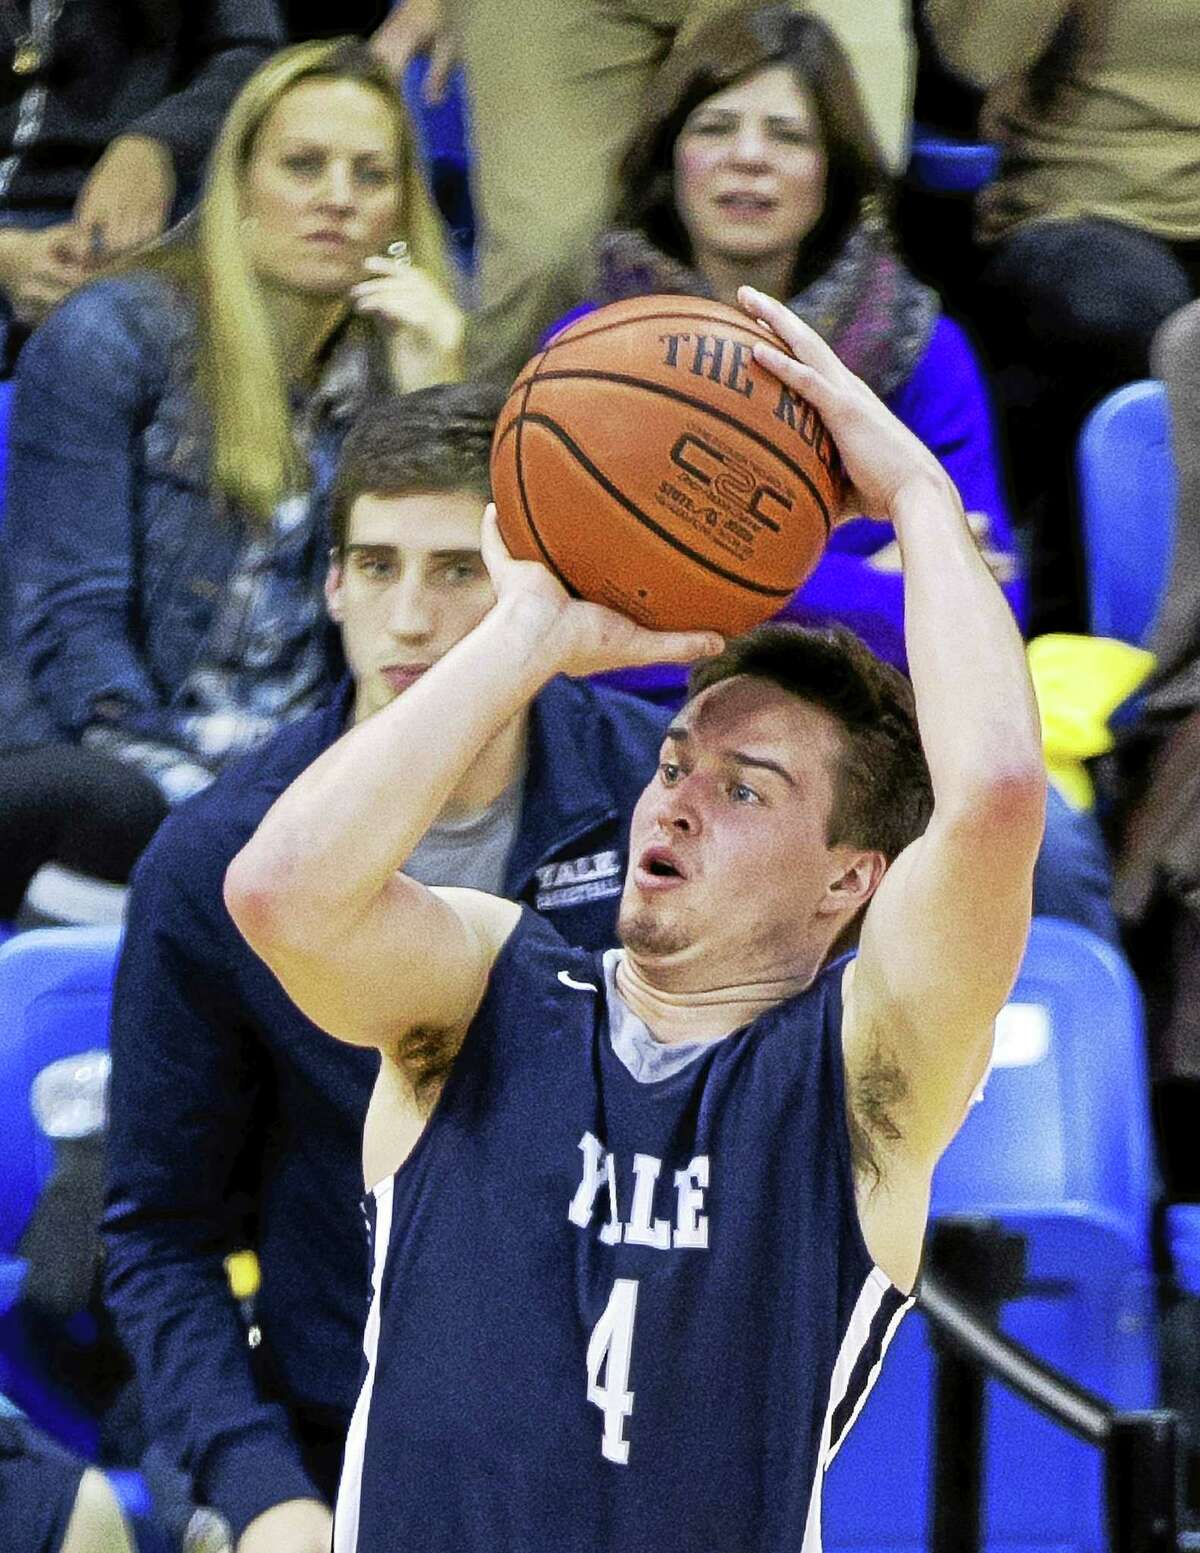 PHOTO COURTESY OF YALE ATHLETICS Yale’s Jack Montague saw limited playing at the start of last season, but earlier this month hit the game-winning shot against UConn.